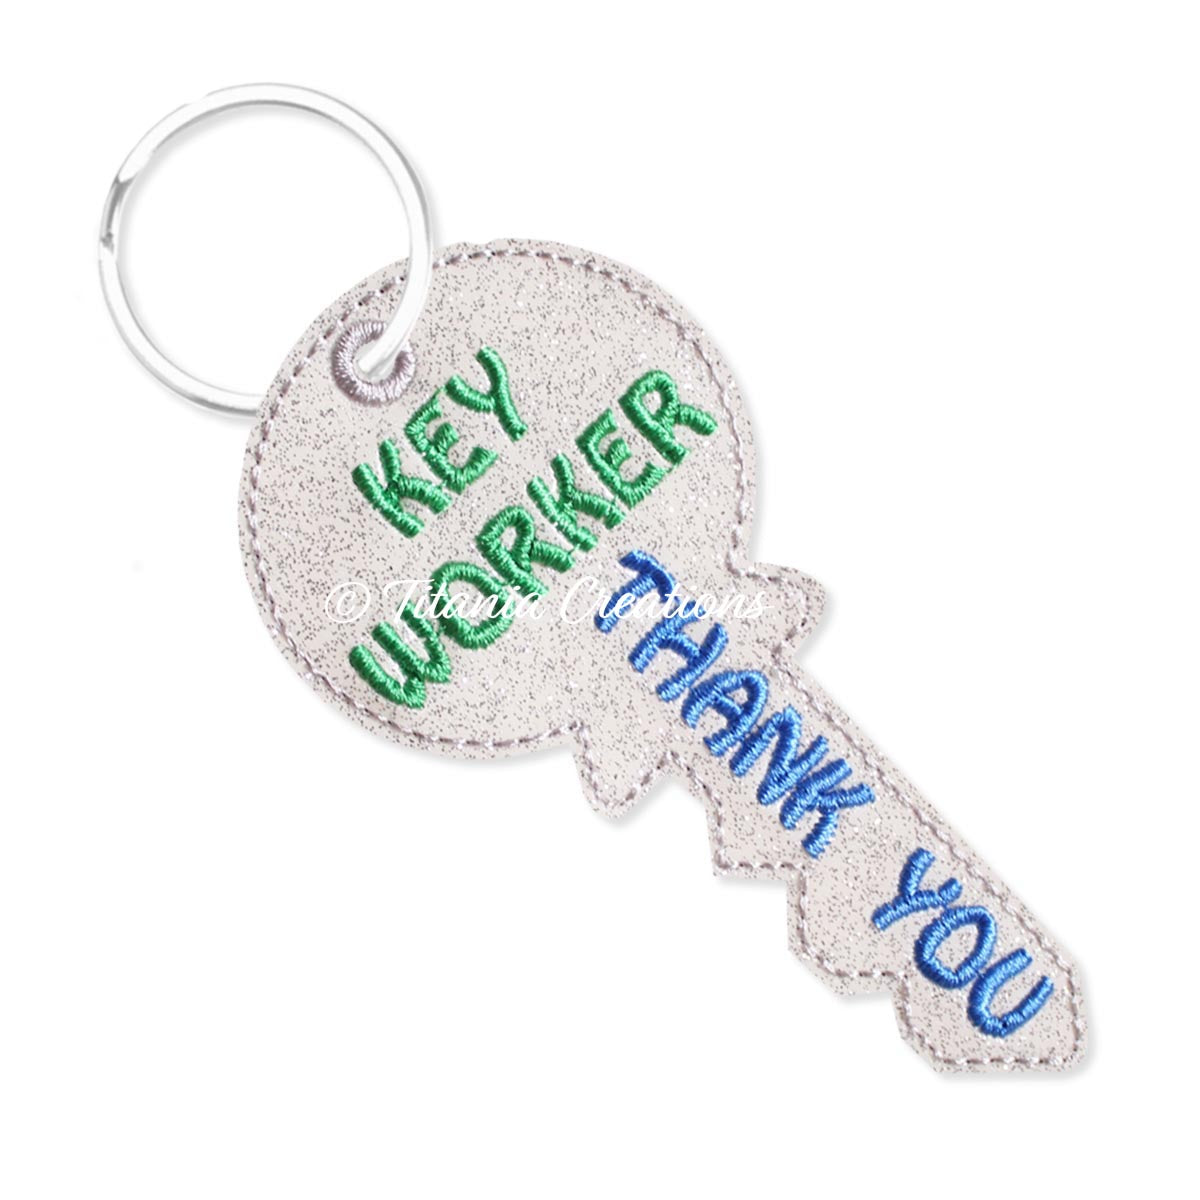 ITH Thank You Key Worker Tag 4x4